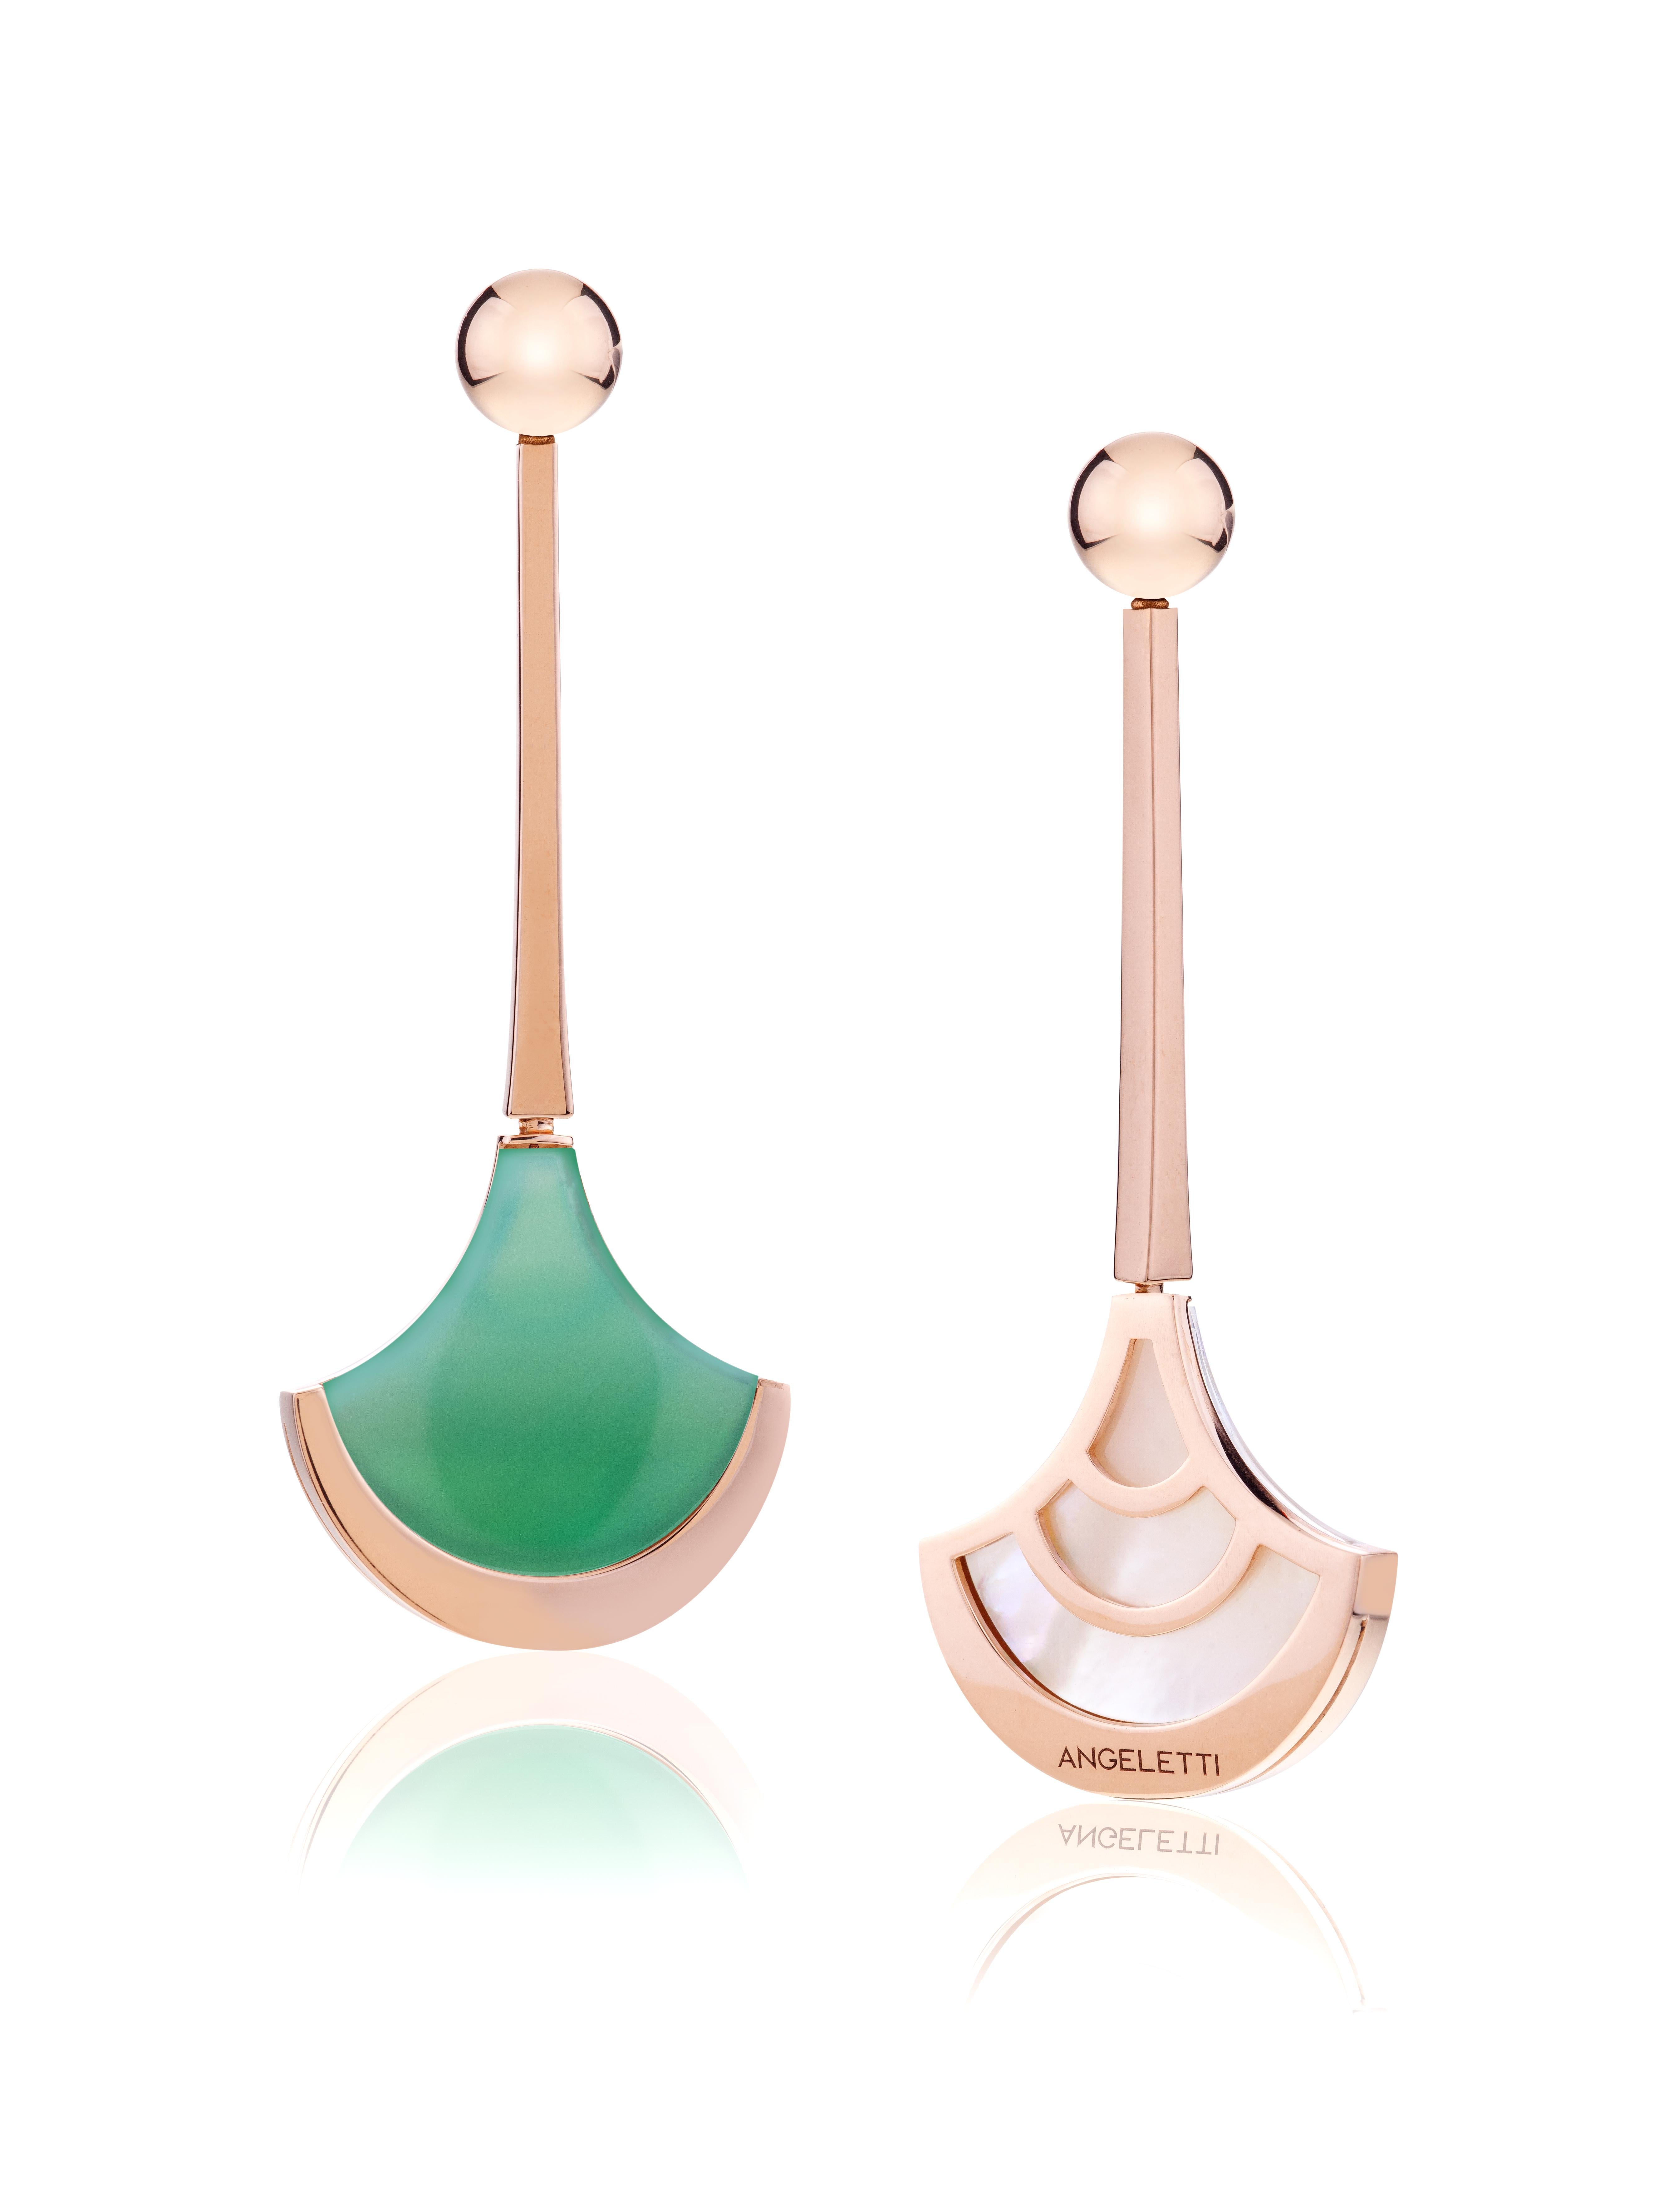 Angeletti Rose Gold Diamonds Green Agate and Mother of Pearl Earrings.
Everyday Earrings with Precious doublette of Green Agate and Mother of Pearl with an extraordinary milky effect. 18kt Gold is around  20 grams. 
Angeletti Boasts an Exceptional